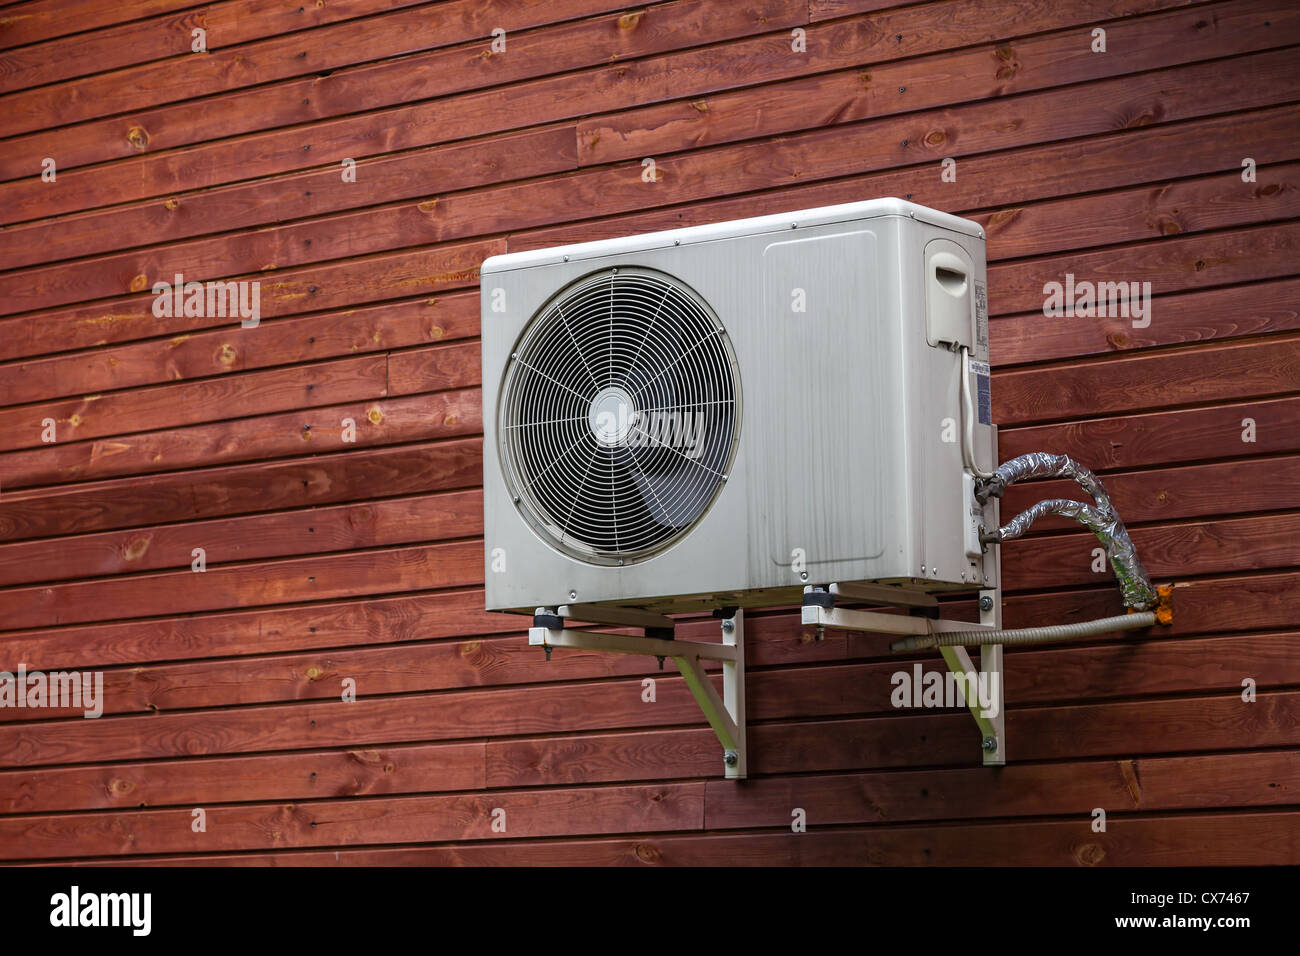 Air conditioner on the wall of boards. Stock Photo